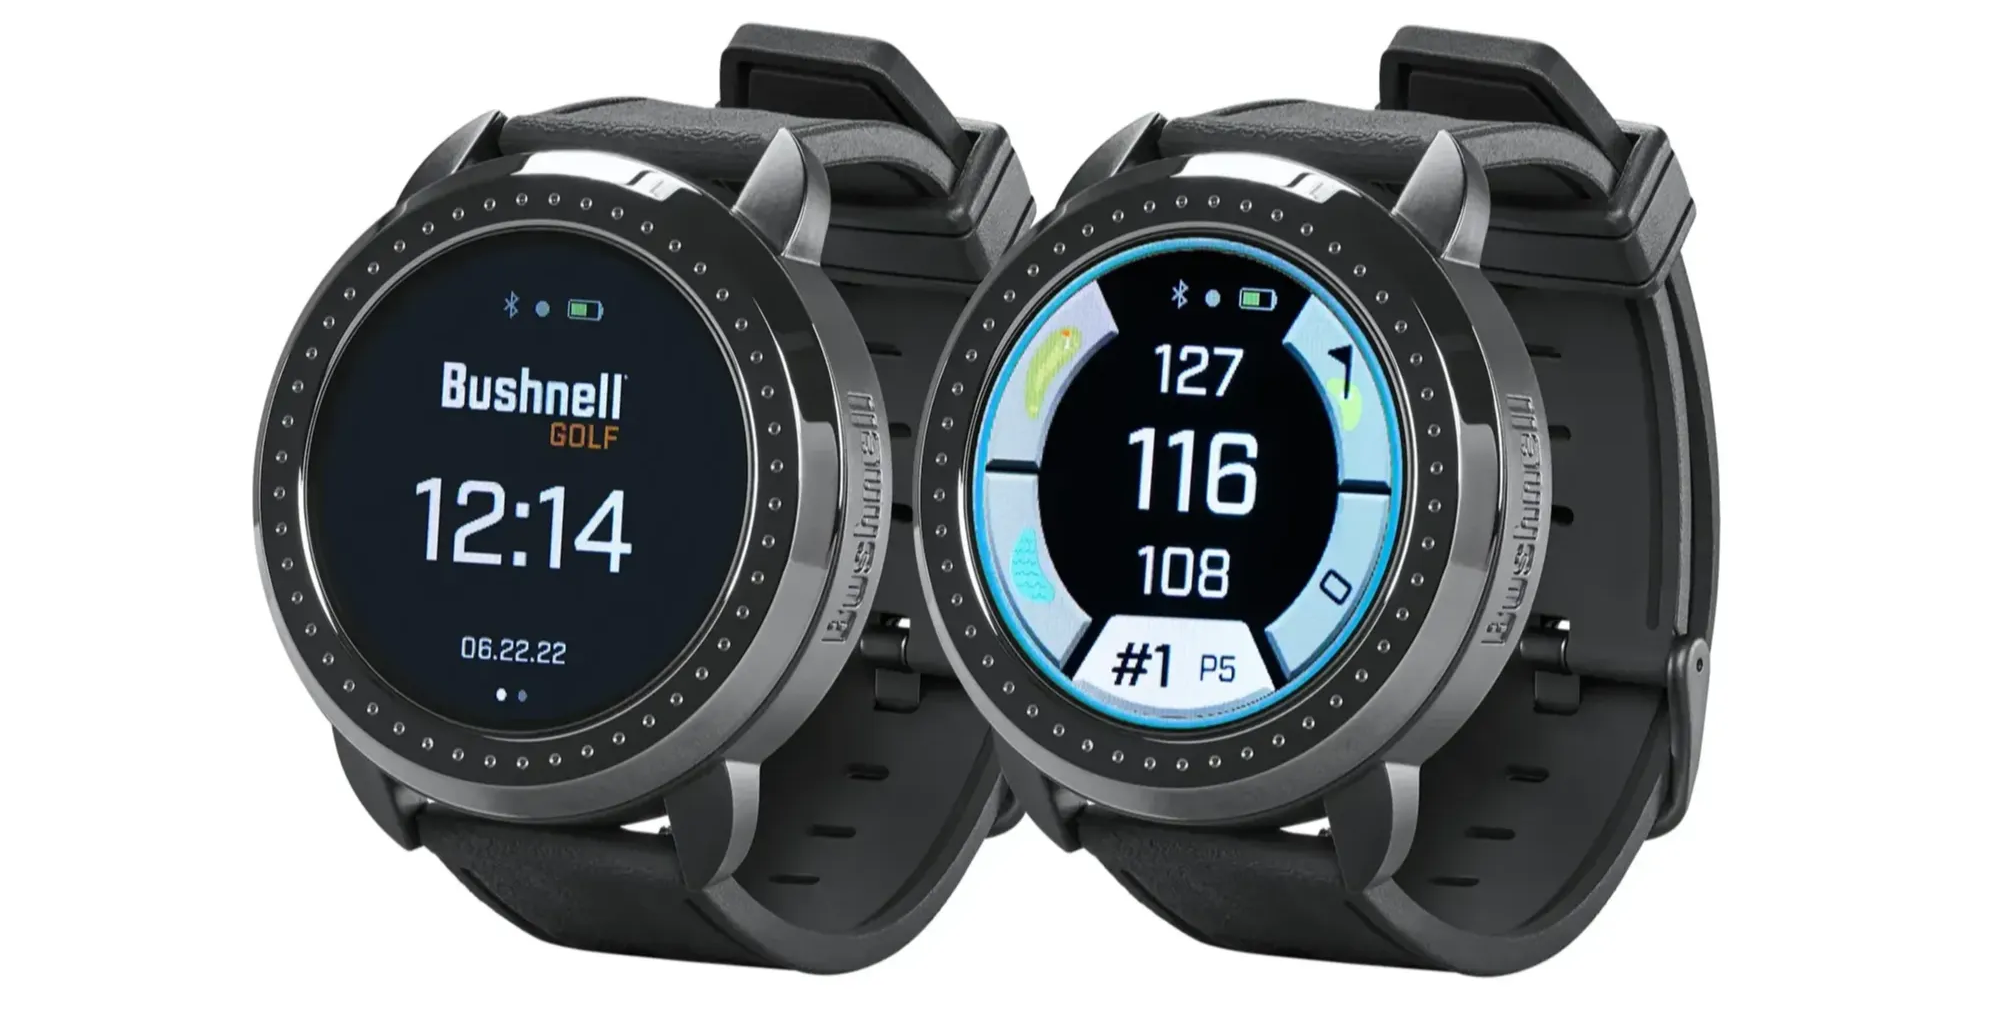 2 Bushnell iON Elite golf GPS watches with time watch face and distances on display 